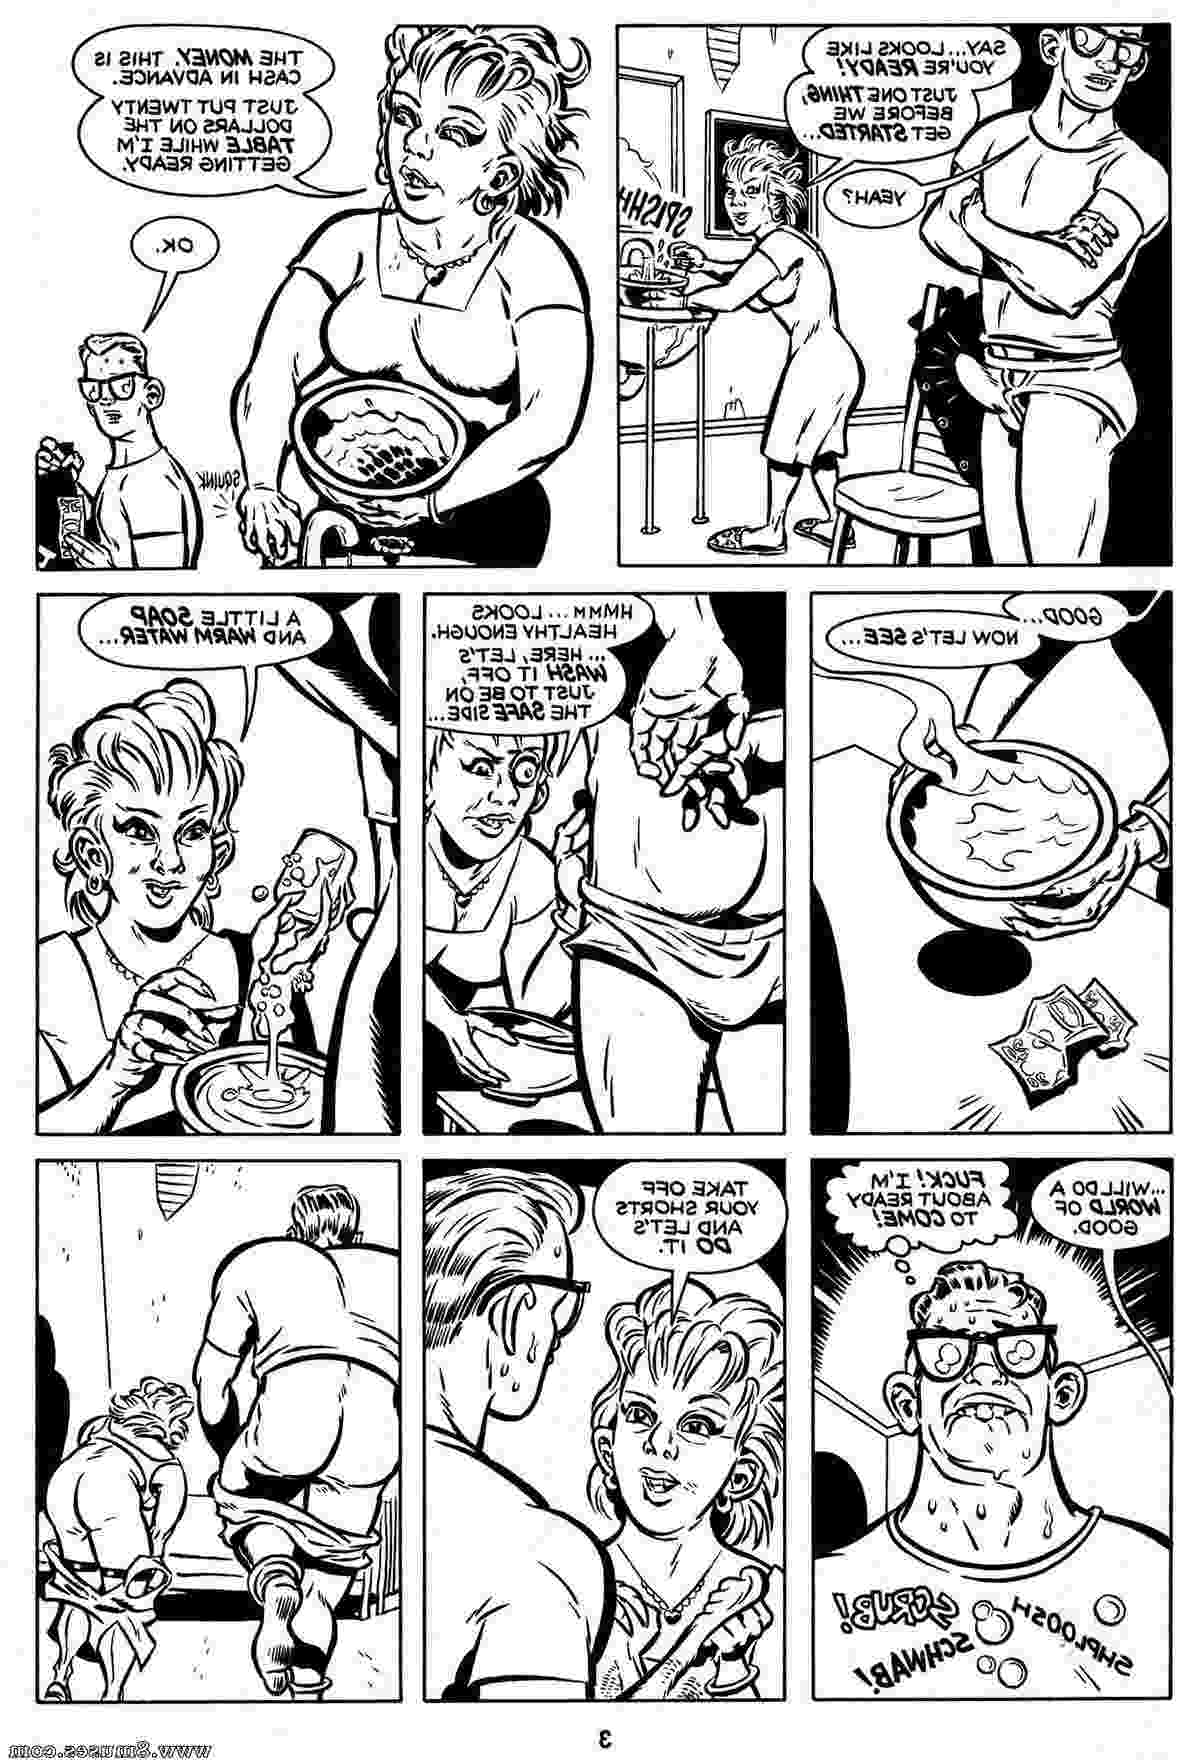 EROS-Comics/Real-Smut Real_Smut__8muses_-_Sex_and_Porn_Comics_5.jpg